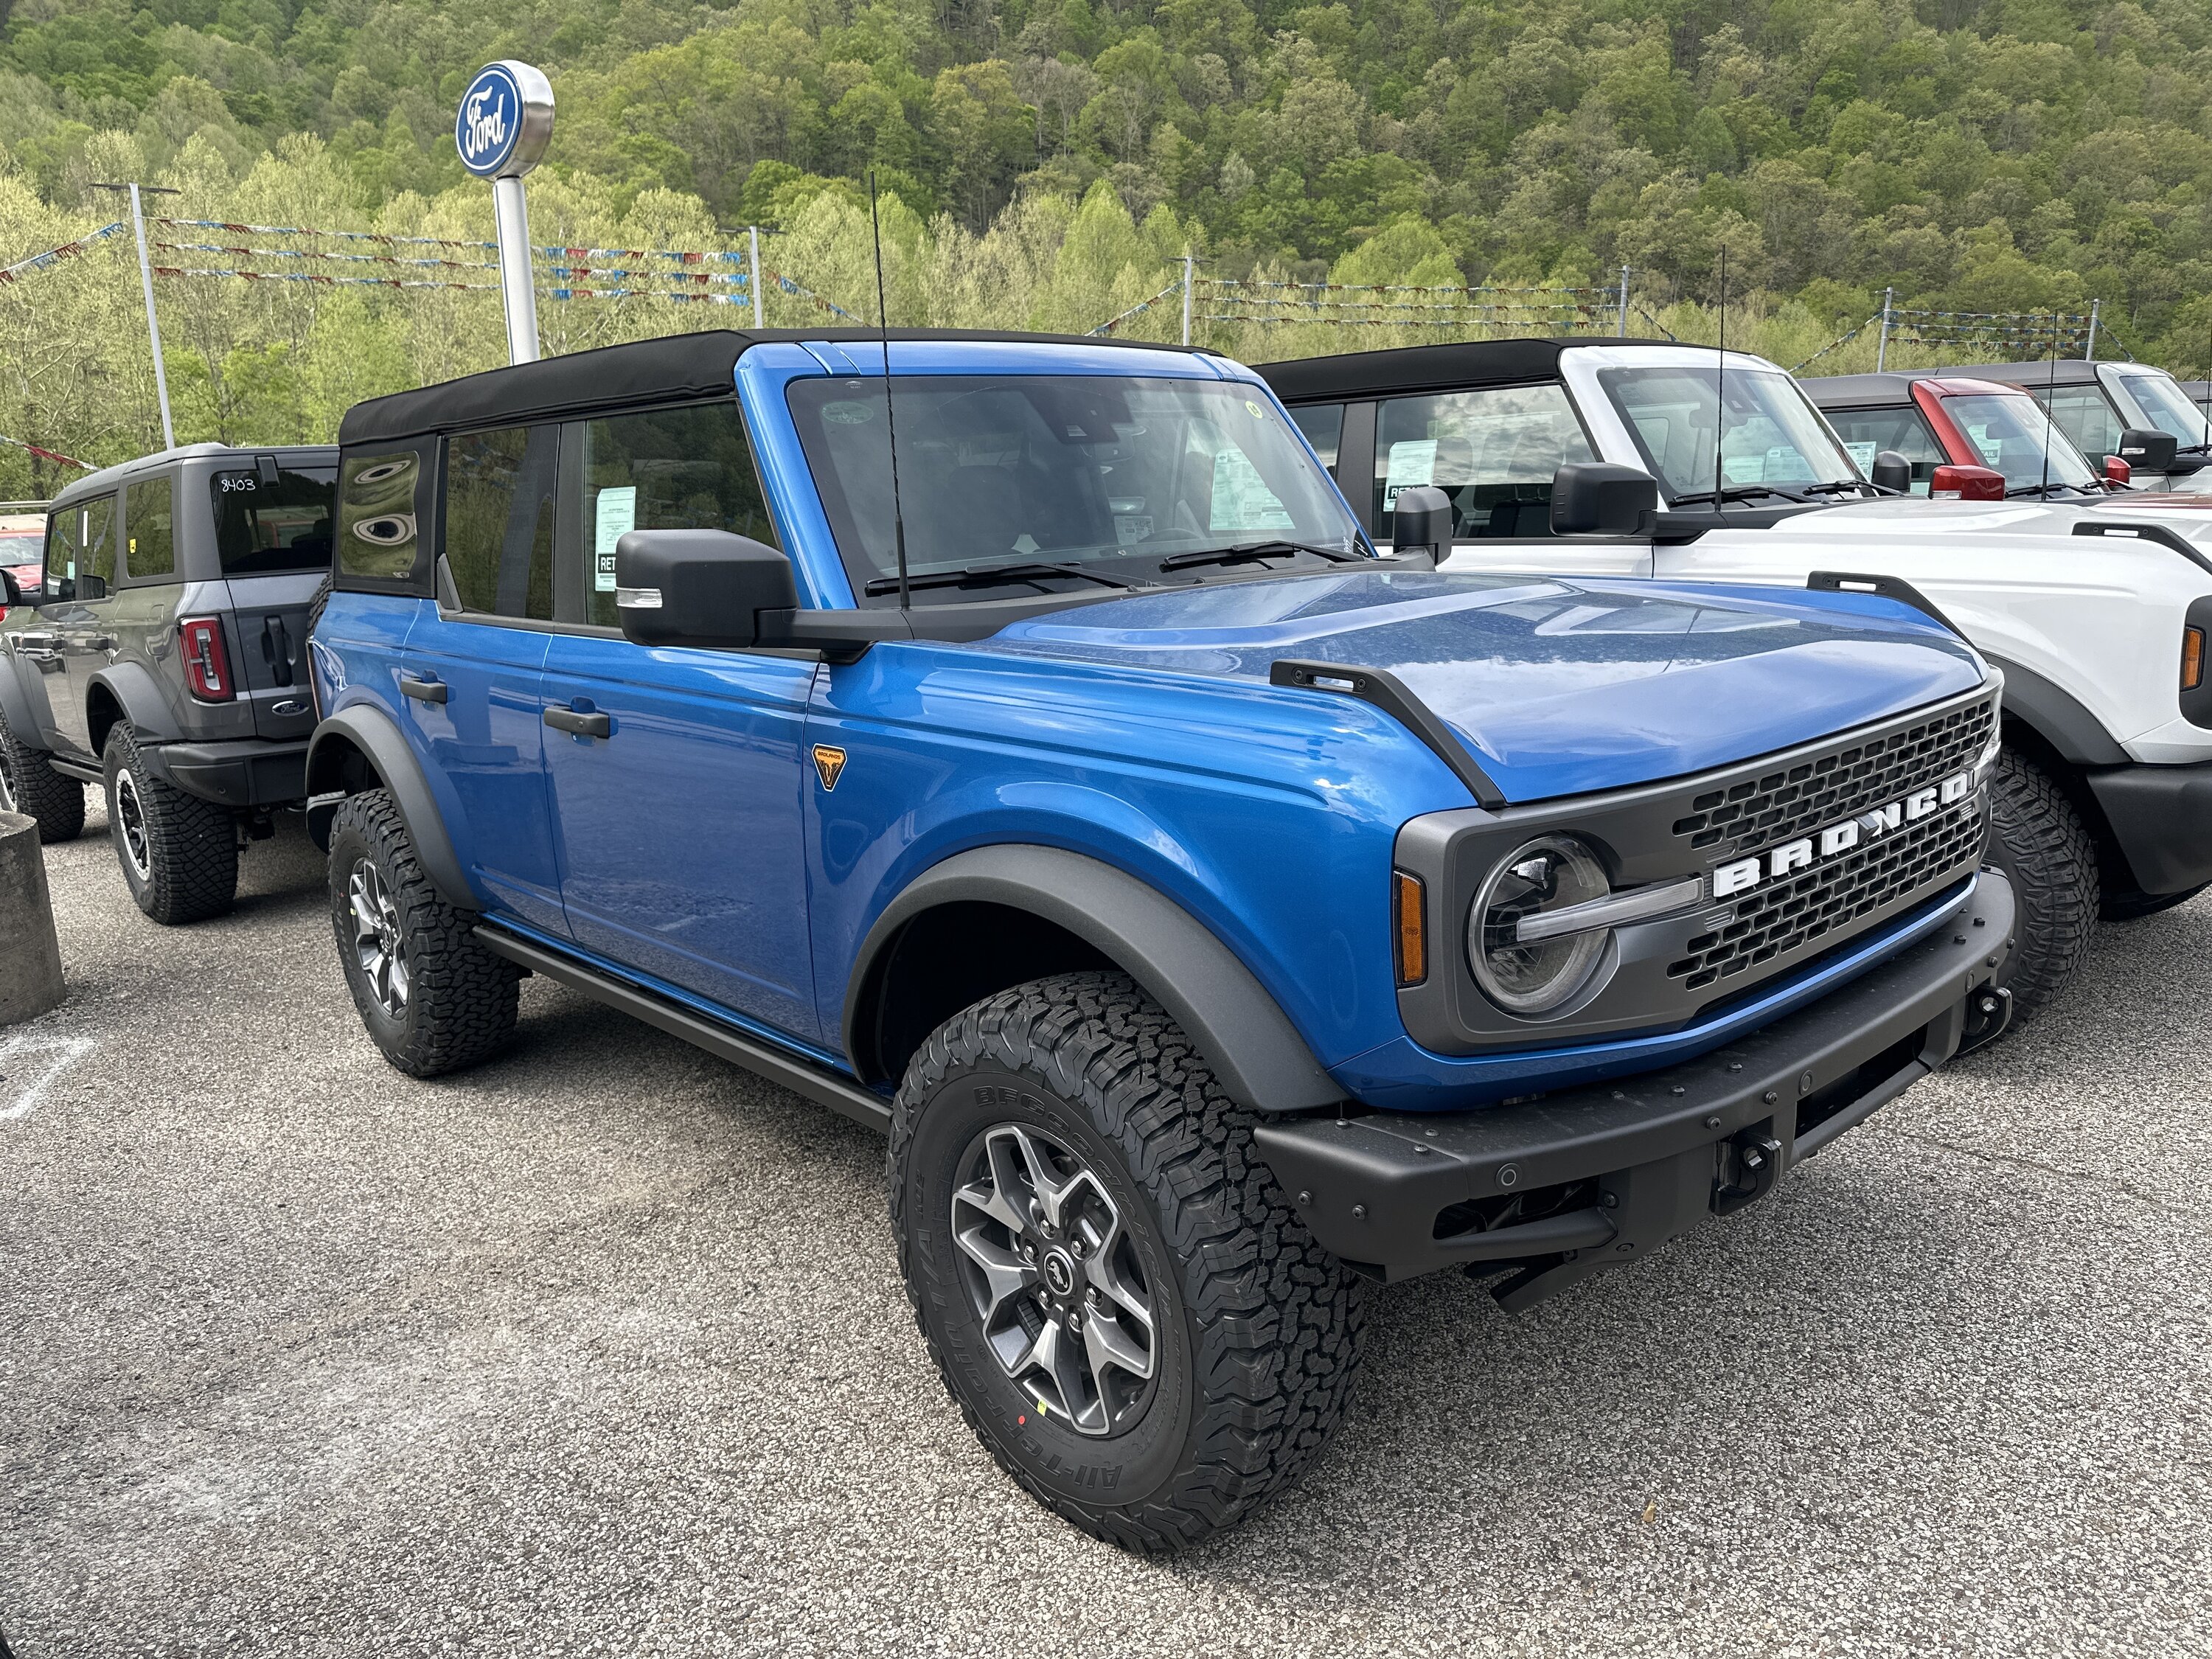 Ford Bronco The Plan & Offer - Stephens Auto Center's Mid Atlantic Bronco Connection ADE3926C-1347-45D5-8E61-2F7D5CF62C18